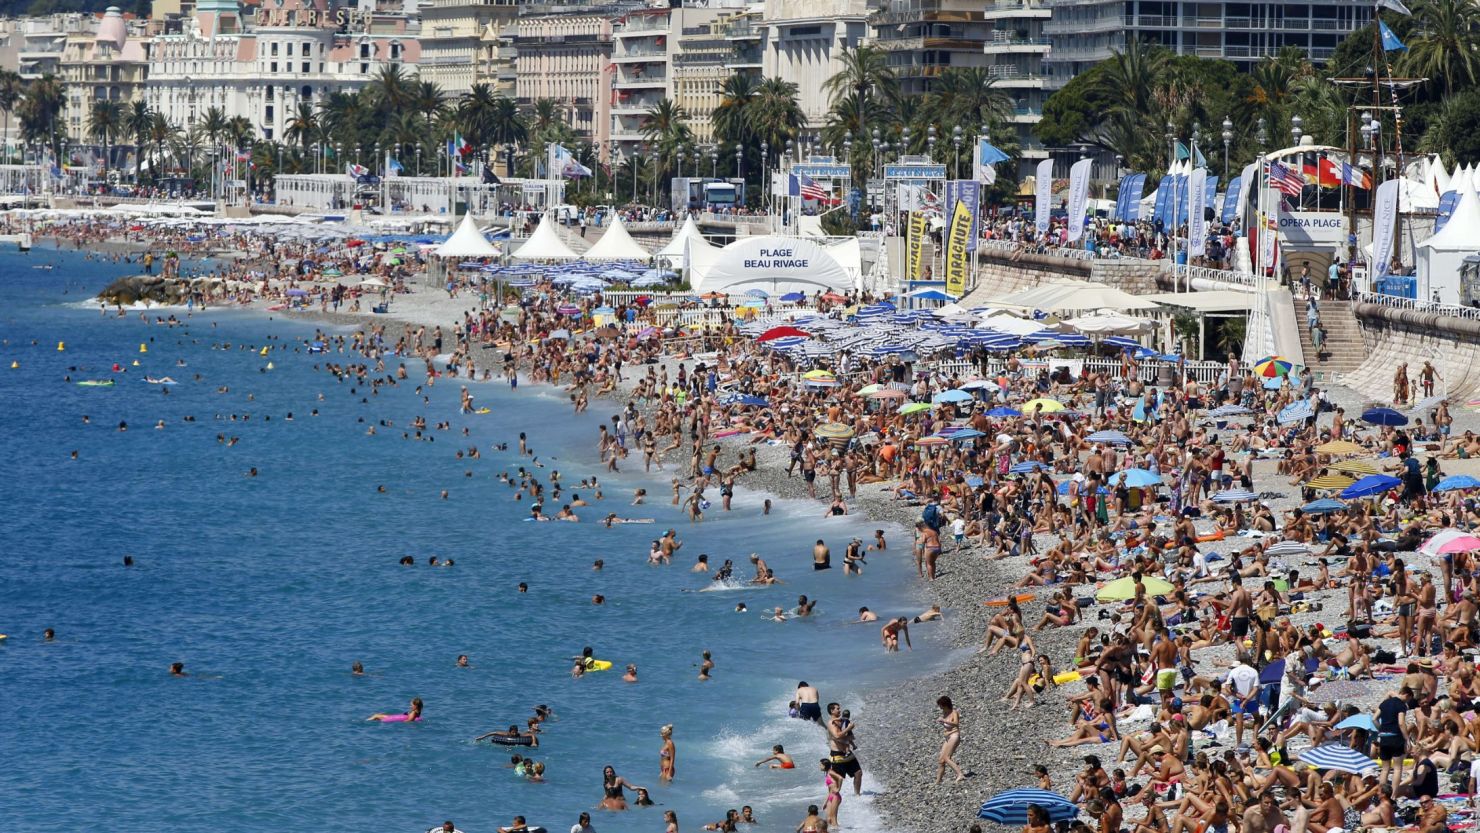 Travelers are posting their photos and memories from Nice across Instagram and Facebook